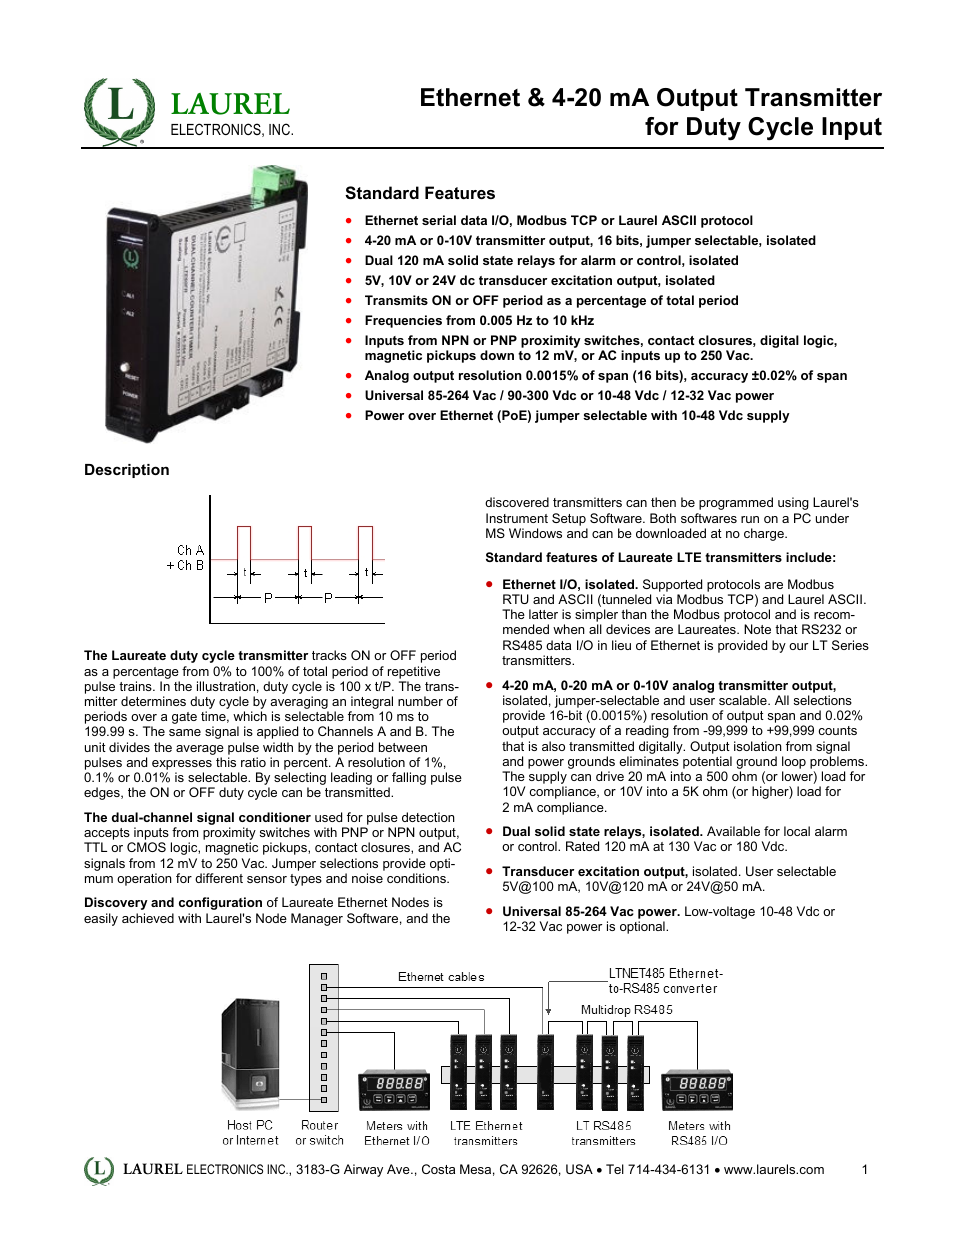 LTE: Ethernet & 4-20 mA Output Transmitter for Duty Cycle Input